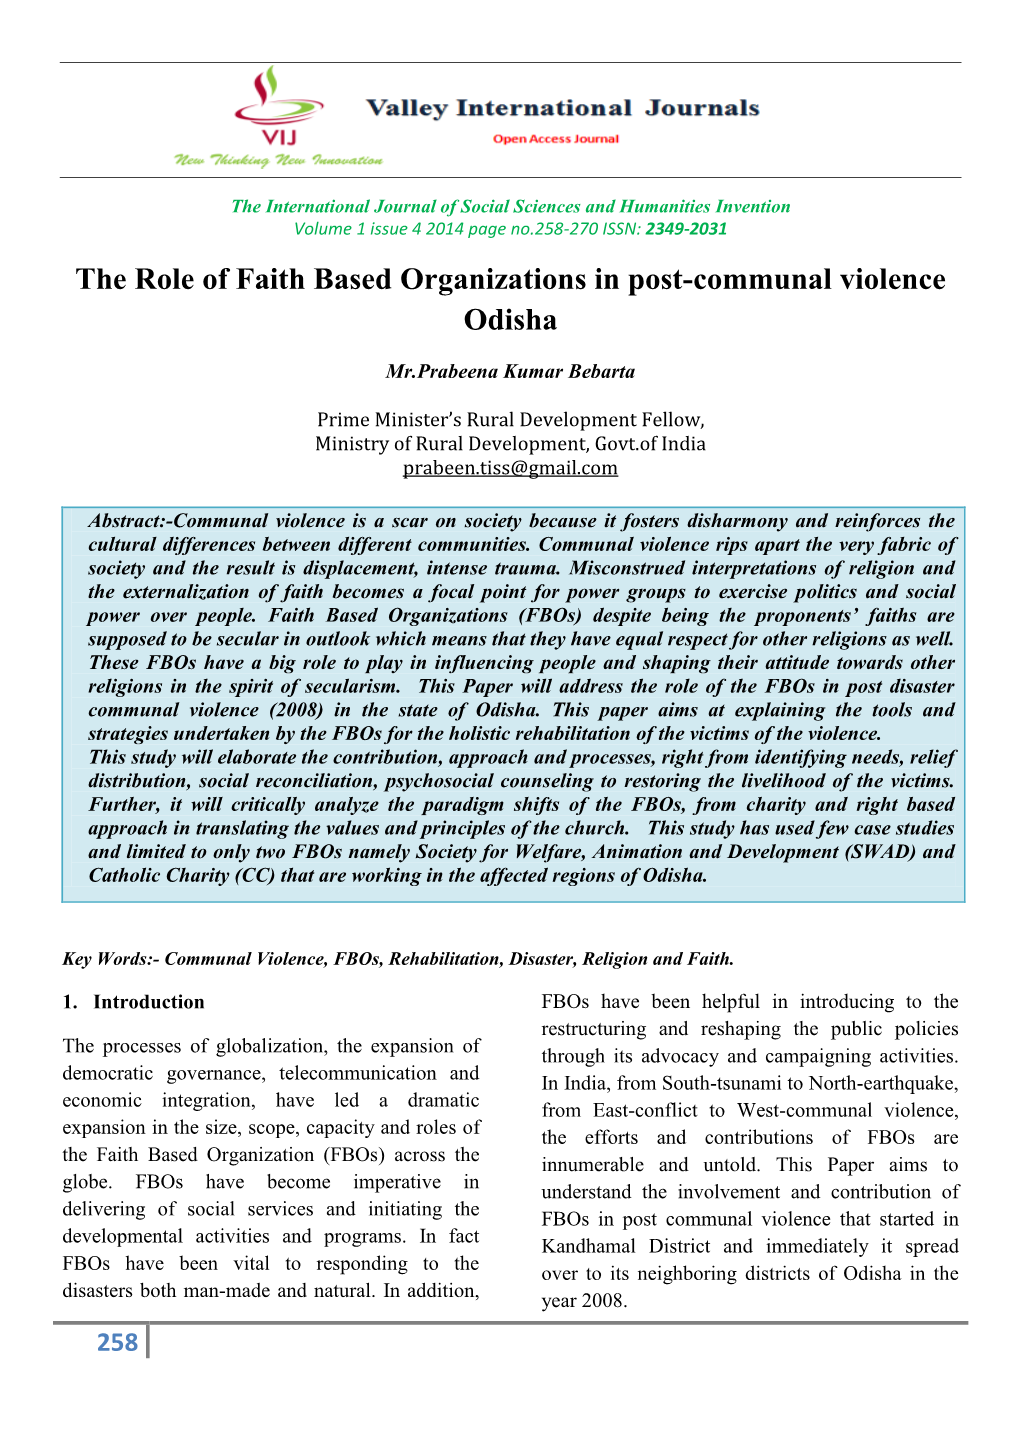 The Role of Faith Based Organizations in Post-Communal Violence Odisha